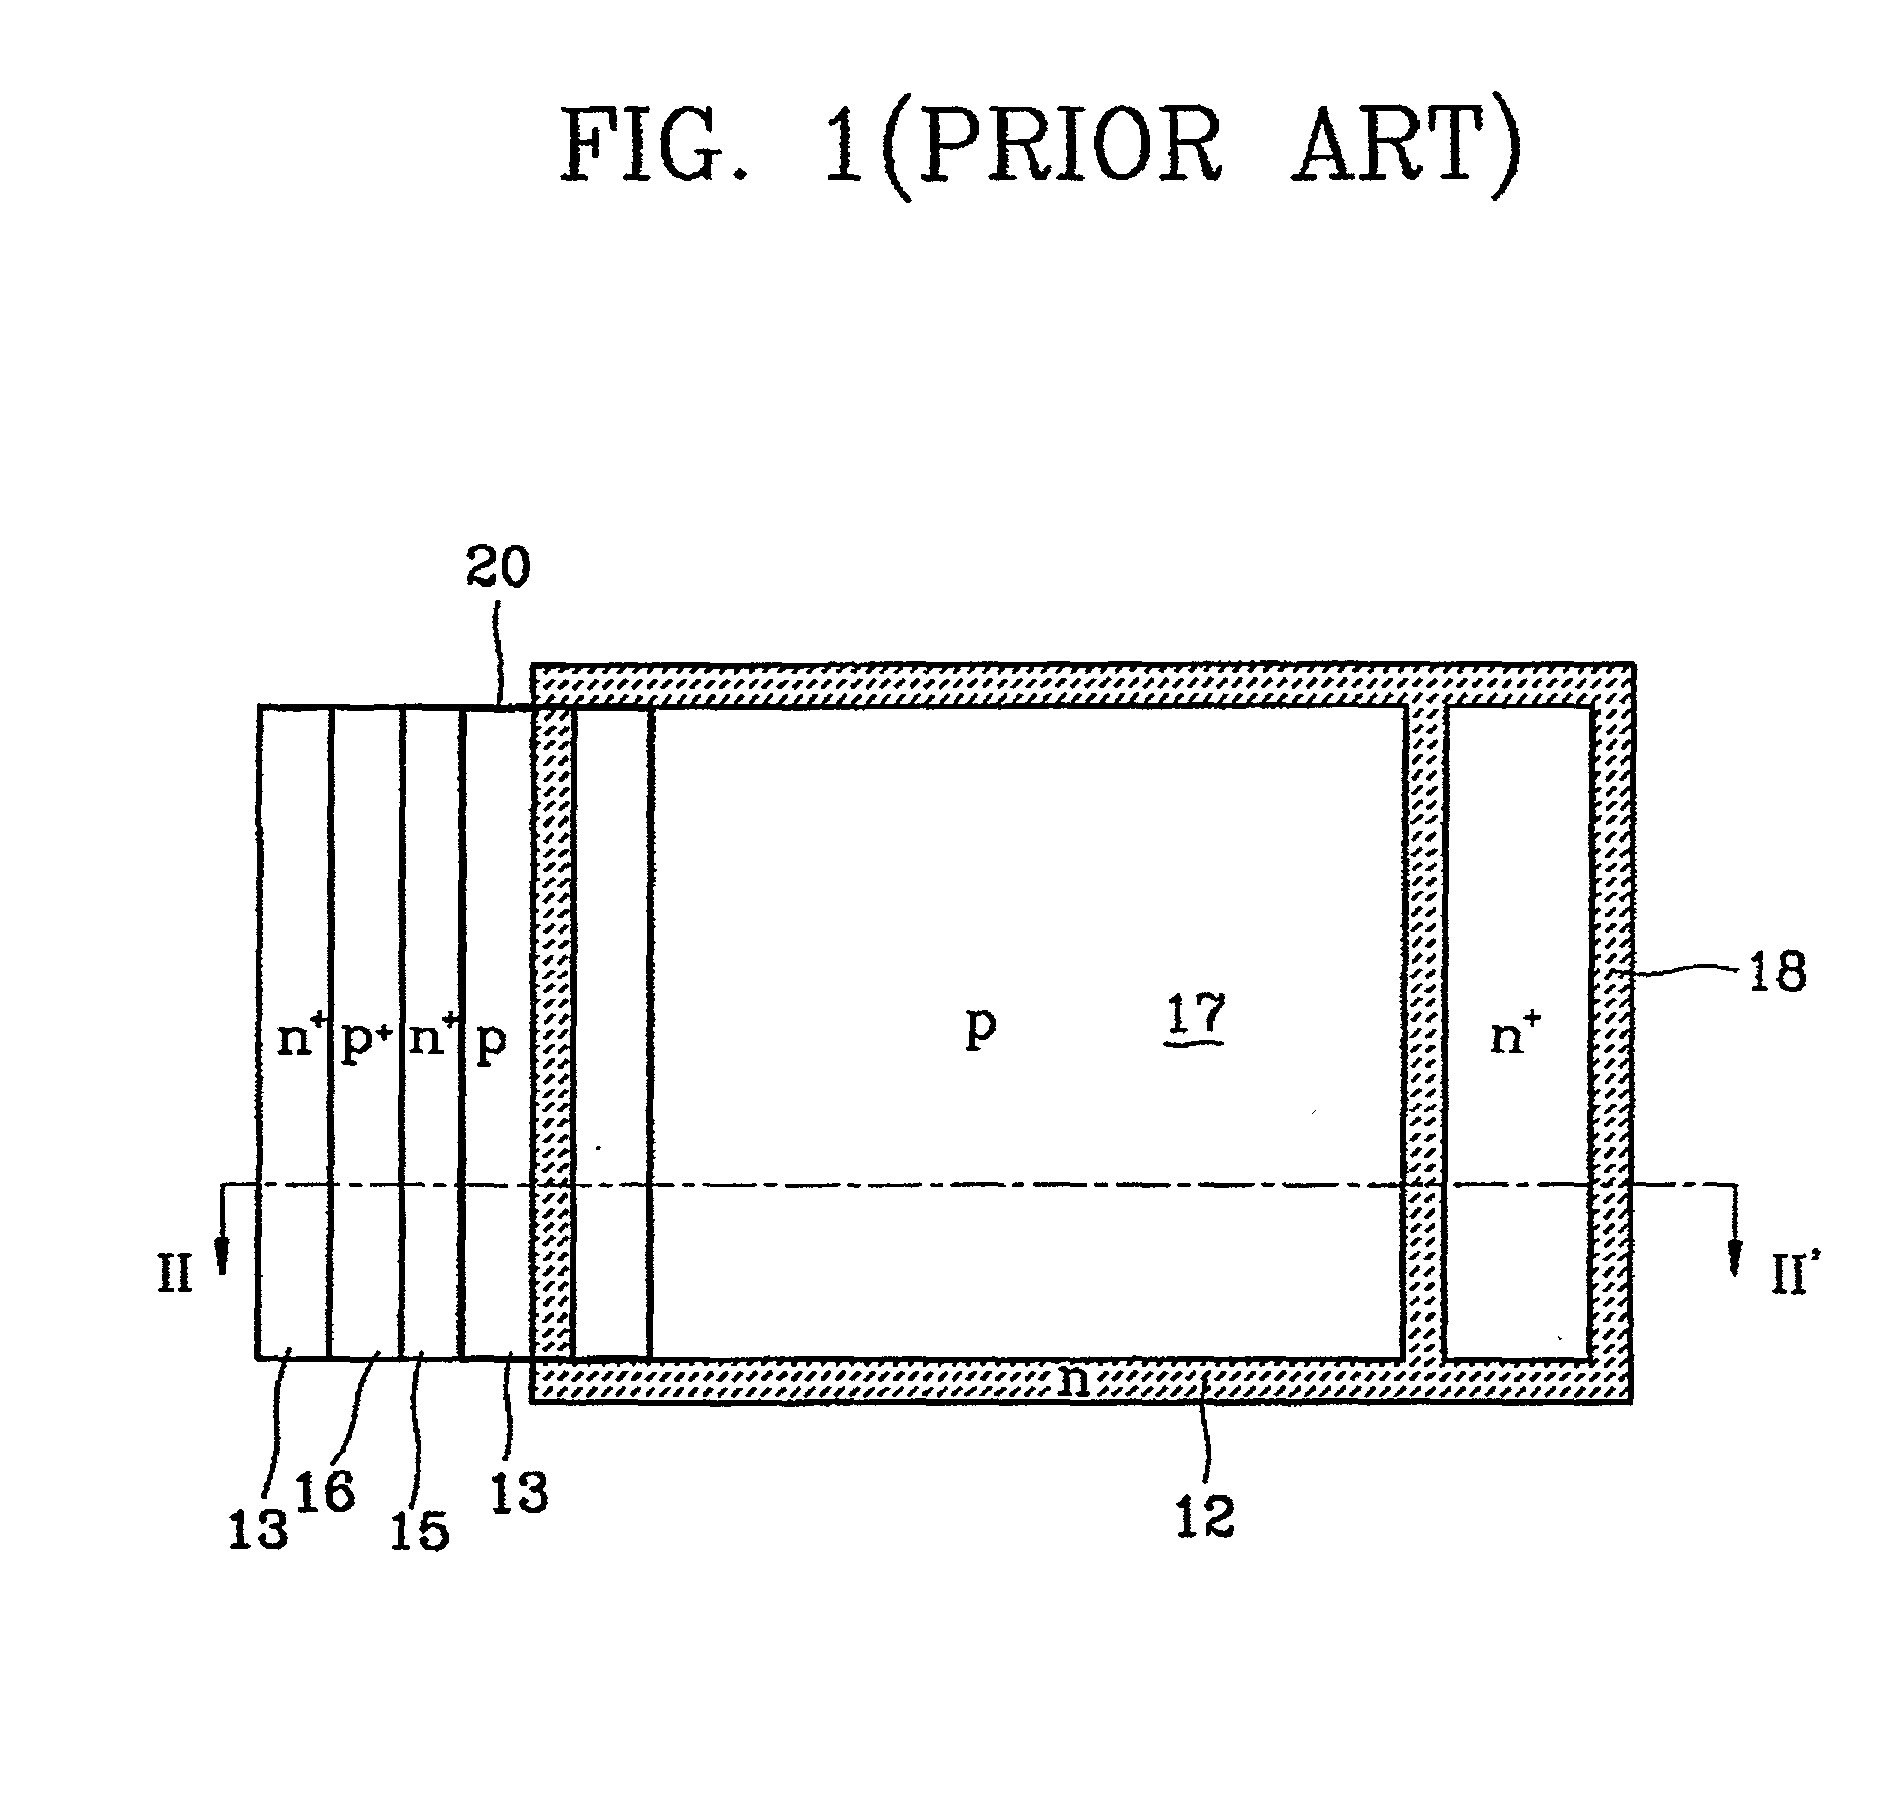 High voltage lateral DMOS transistor having low on-resistance and high breakdown voltage